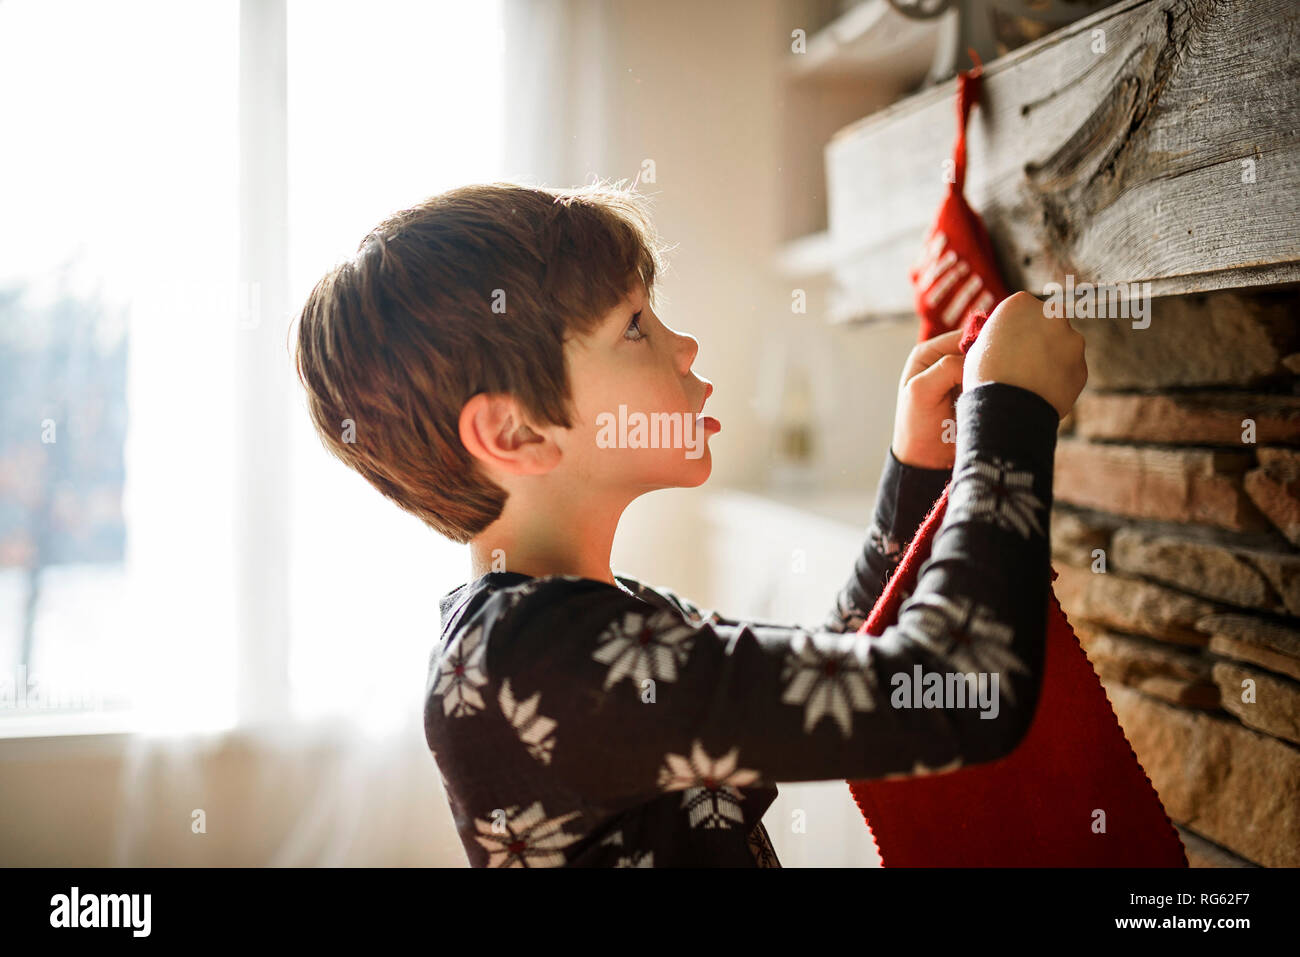 Boy hanging a Christmas stocking on a fireplace Stock Photo